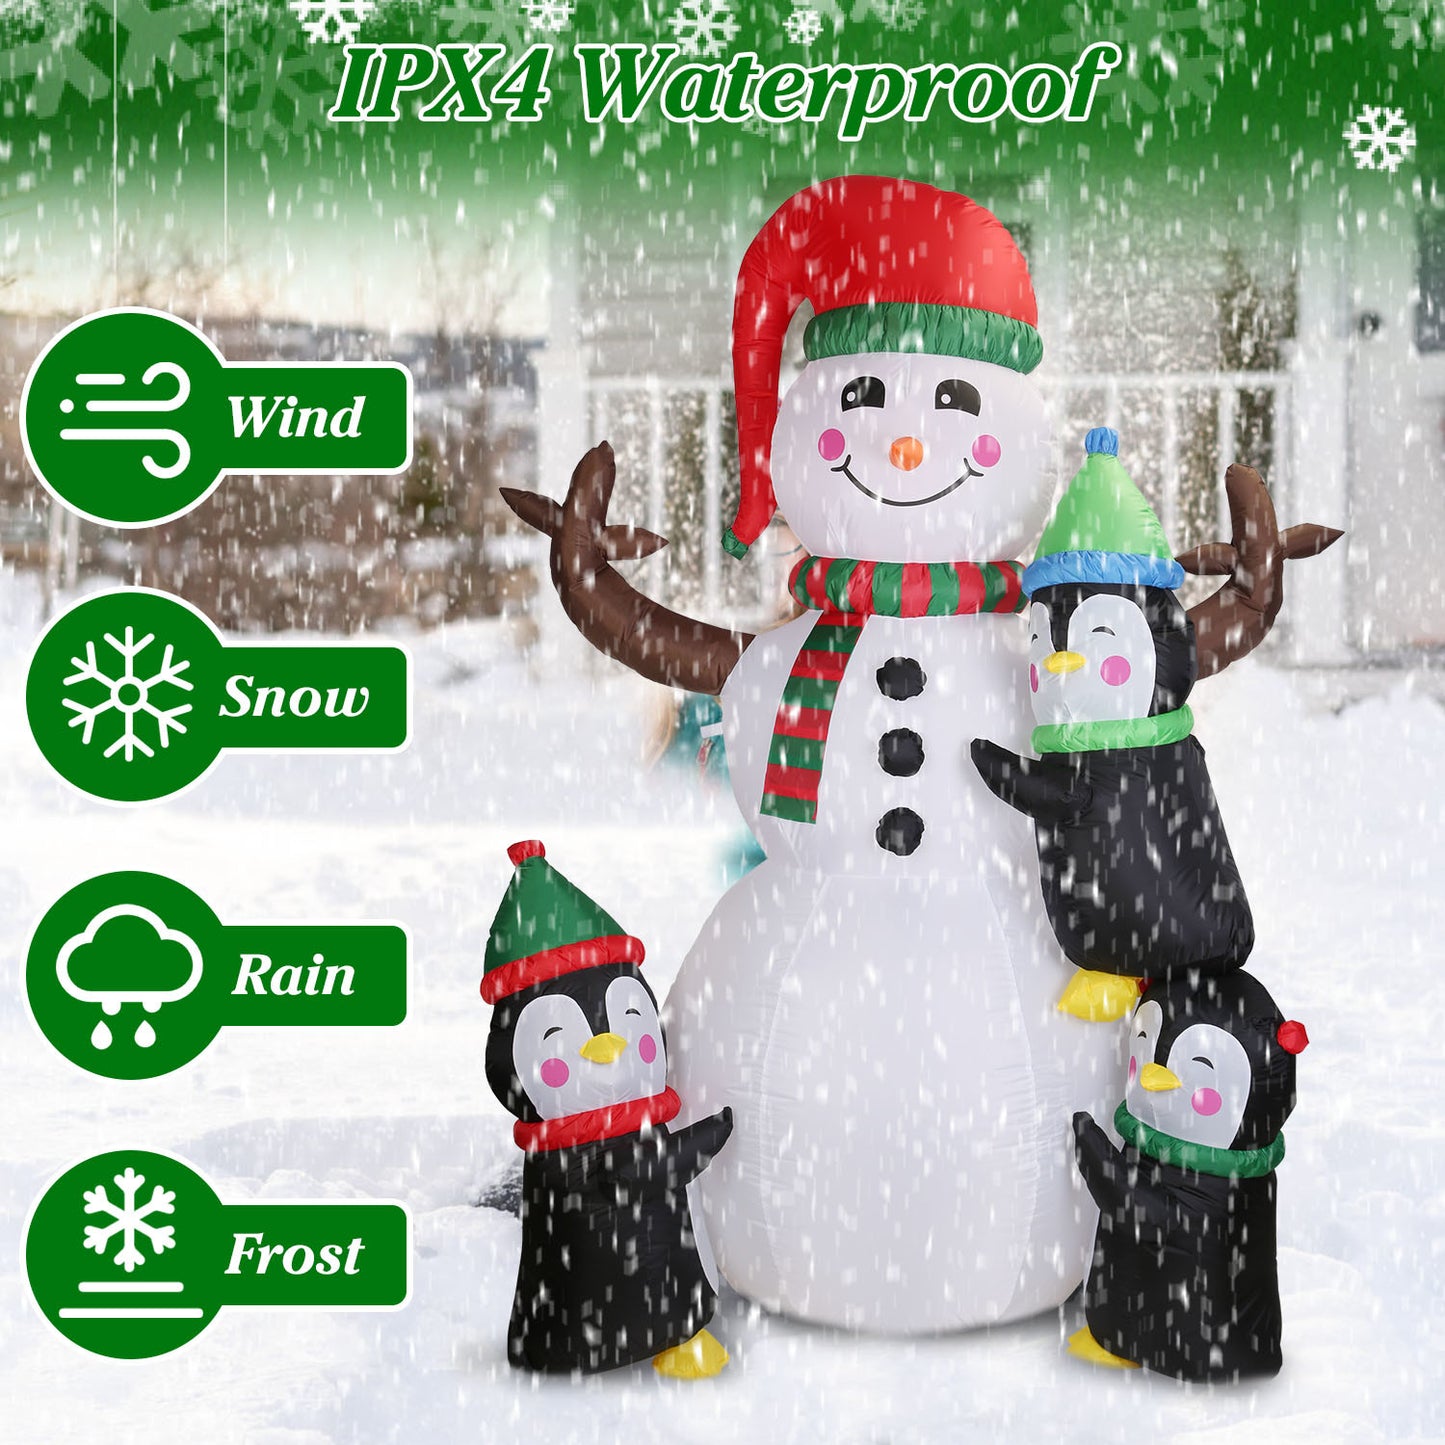 5.9FT Christmas Inflatable Outdoor Decoration Snowman Penguin Blow Up Yard Decoration with LED Light Built-in Air Blower for Winter Holiday Xmas Garden